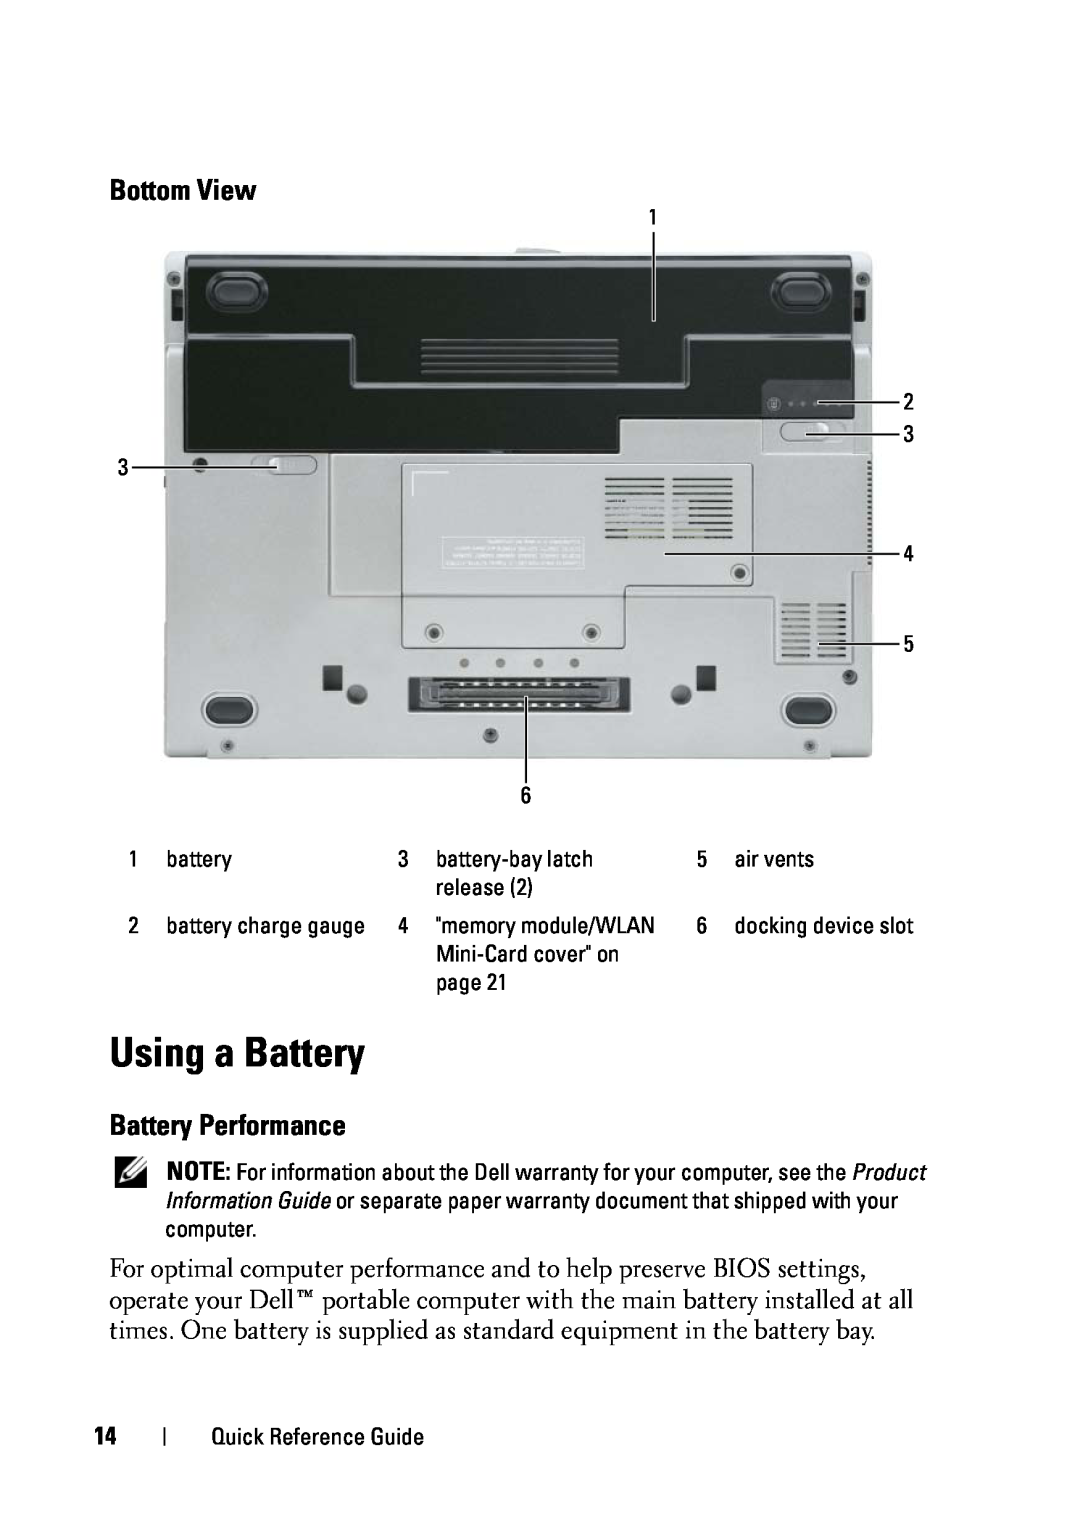 Dell D430 manual Using a Battery, Bottom View, Battery Performance 